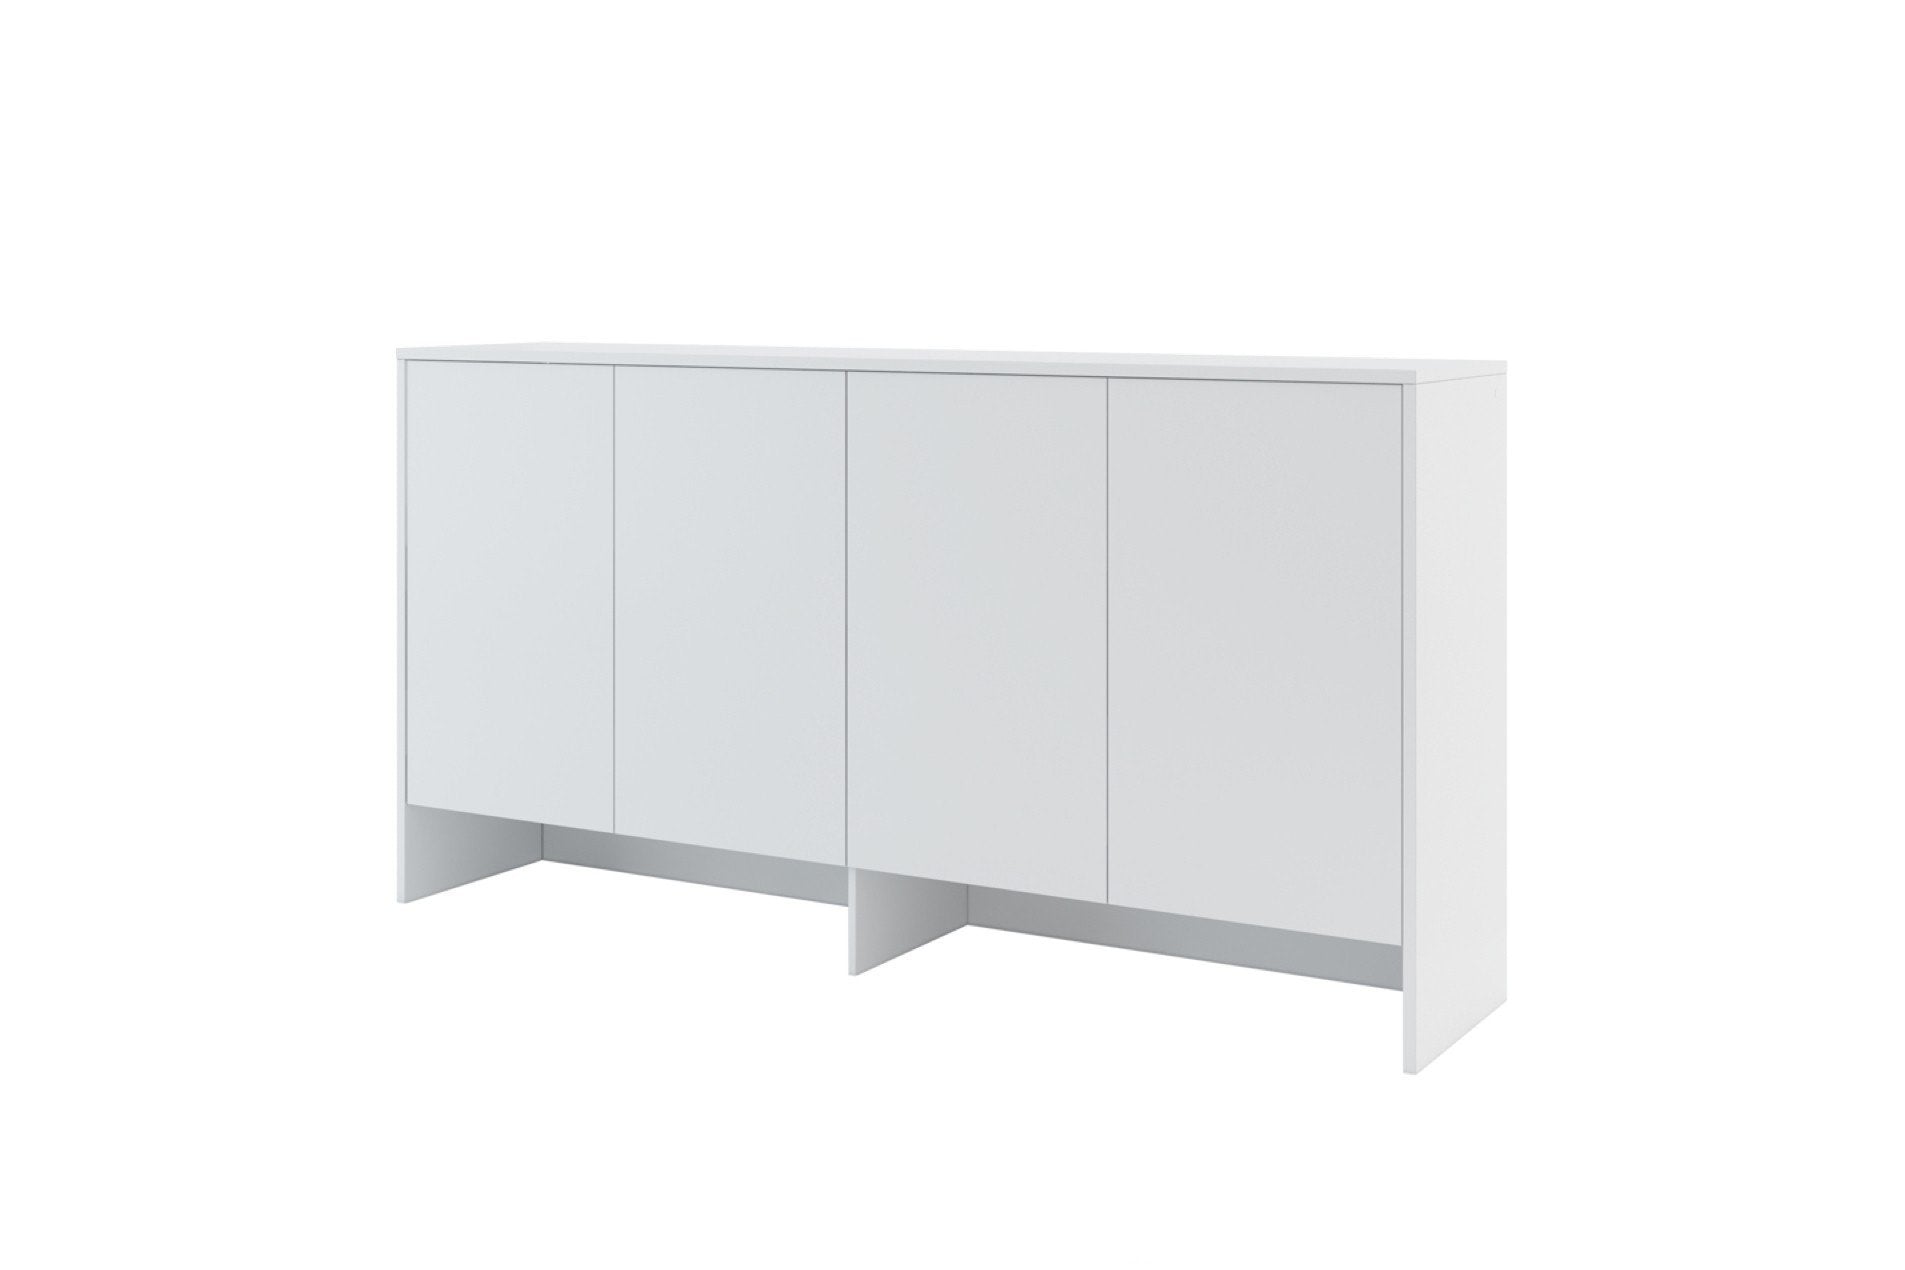 BC-11 Over Bed Unit for Horizontal Wall Bed Concept 90cm White Matt Wall Bed with Storage Unit 